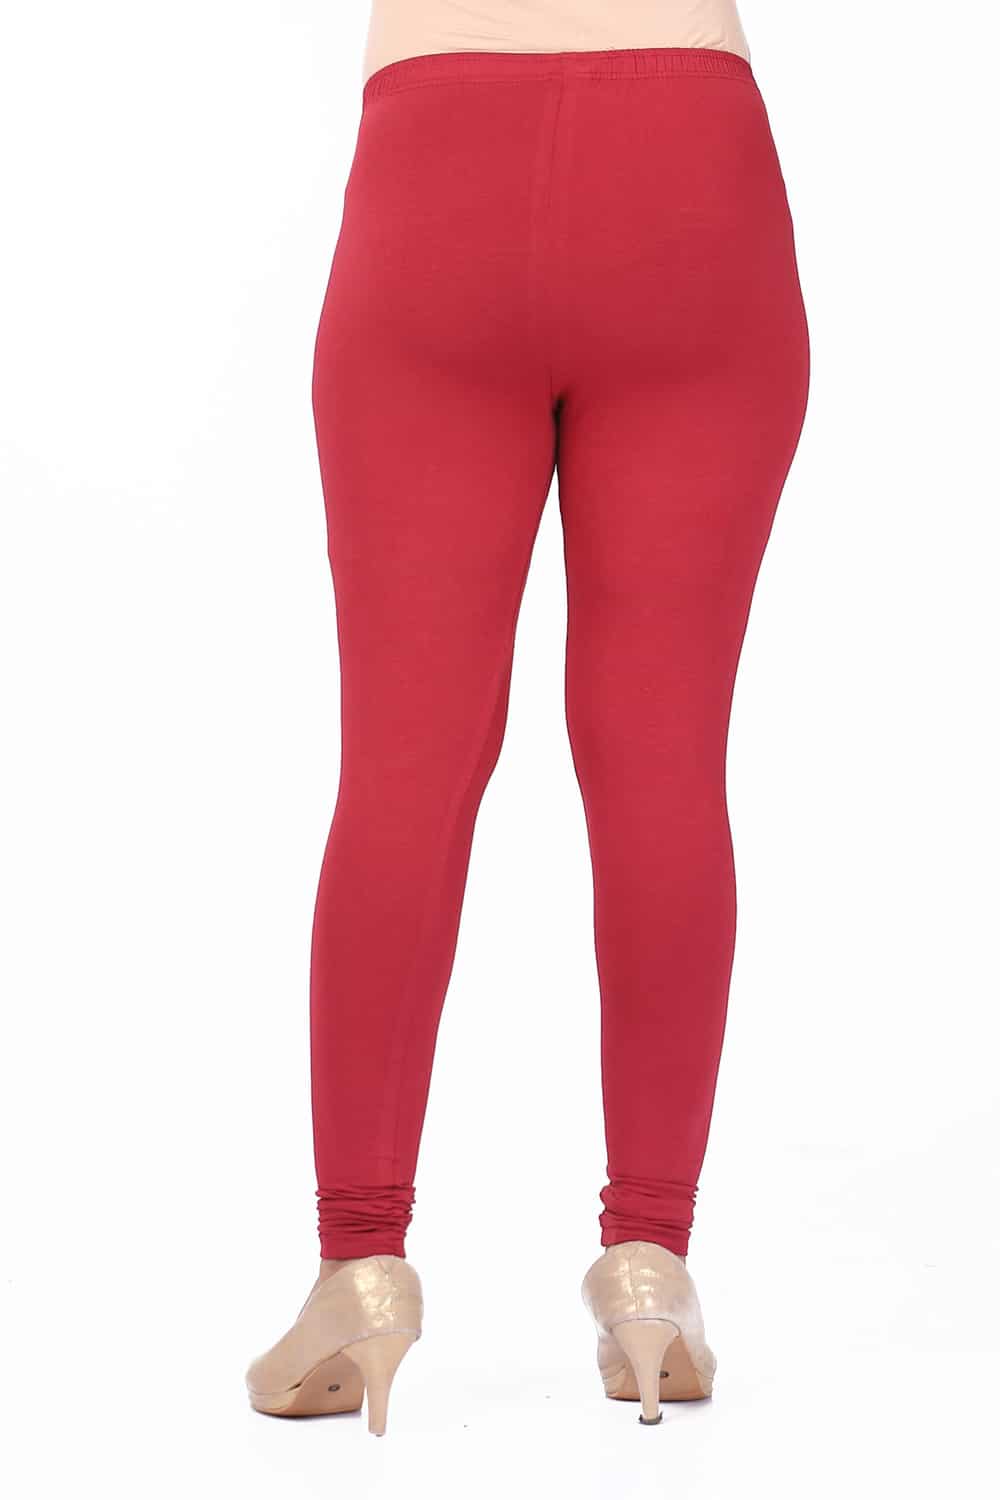 Buy PINKSHELL wear Leggings Colour Combo Churidar Leggings for Women Cotton Lycra  Leggings dailchuridar Solid Slim fit Pajami Ethnic Lower Occasional Leggings  (2XL, Navy/RED) Online In India At Discounted Prices